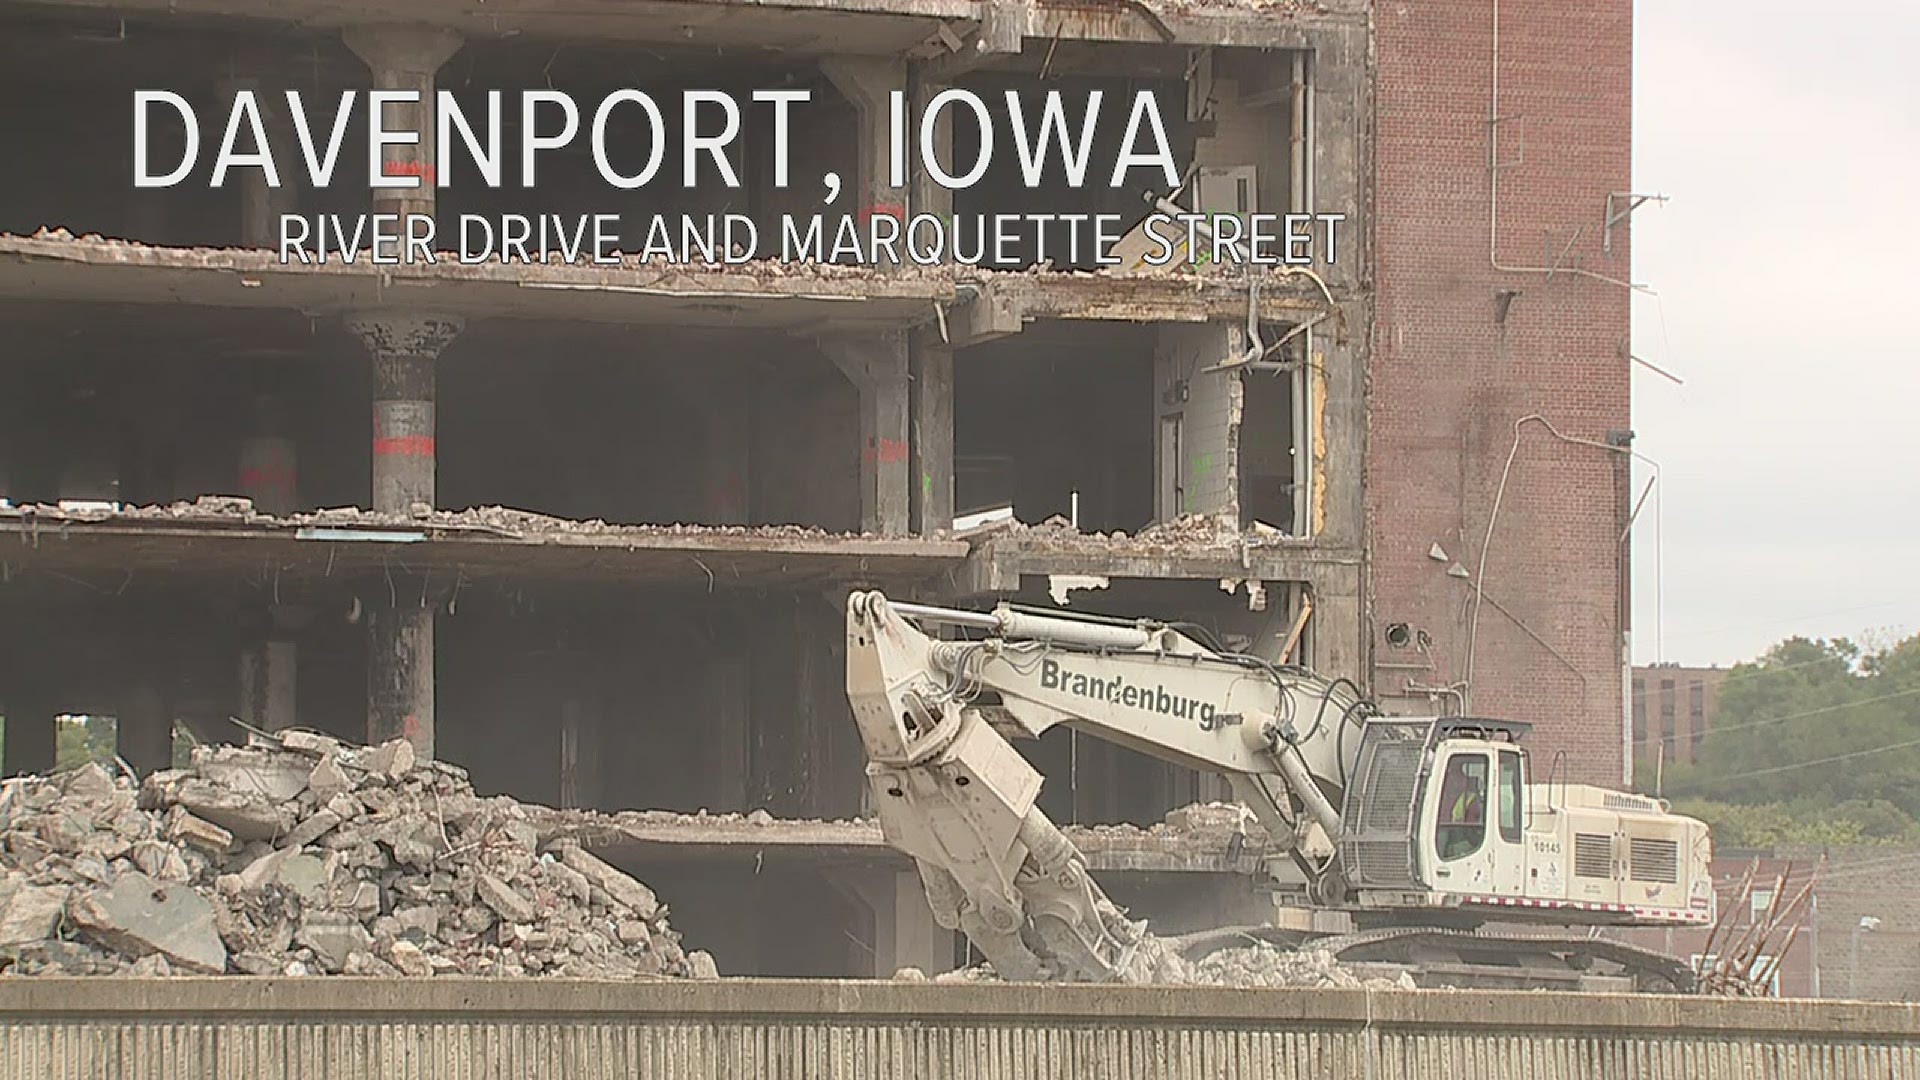 The plant has been at the site on River Drive and Marquette Street since 1946, but parts of the structure date back to 1912.  It's sat idle for years.